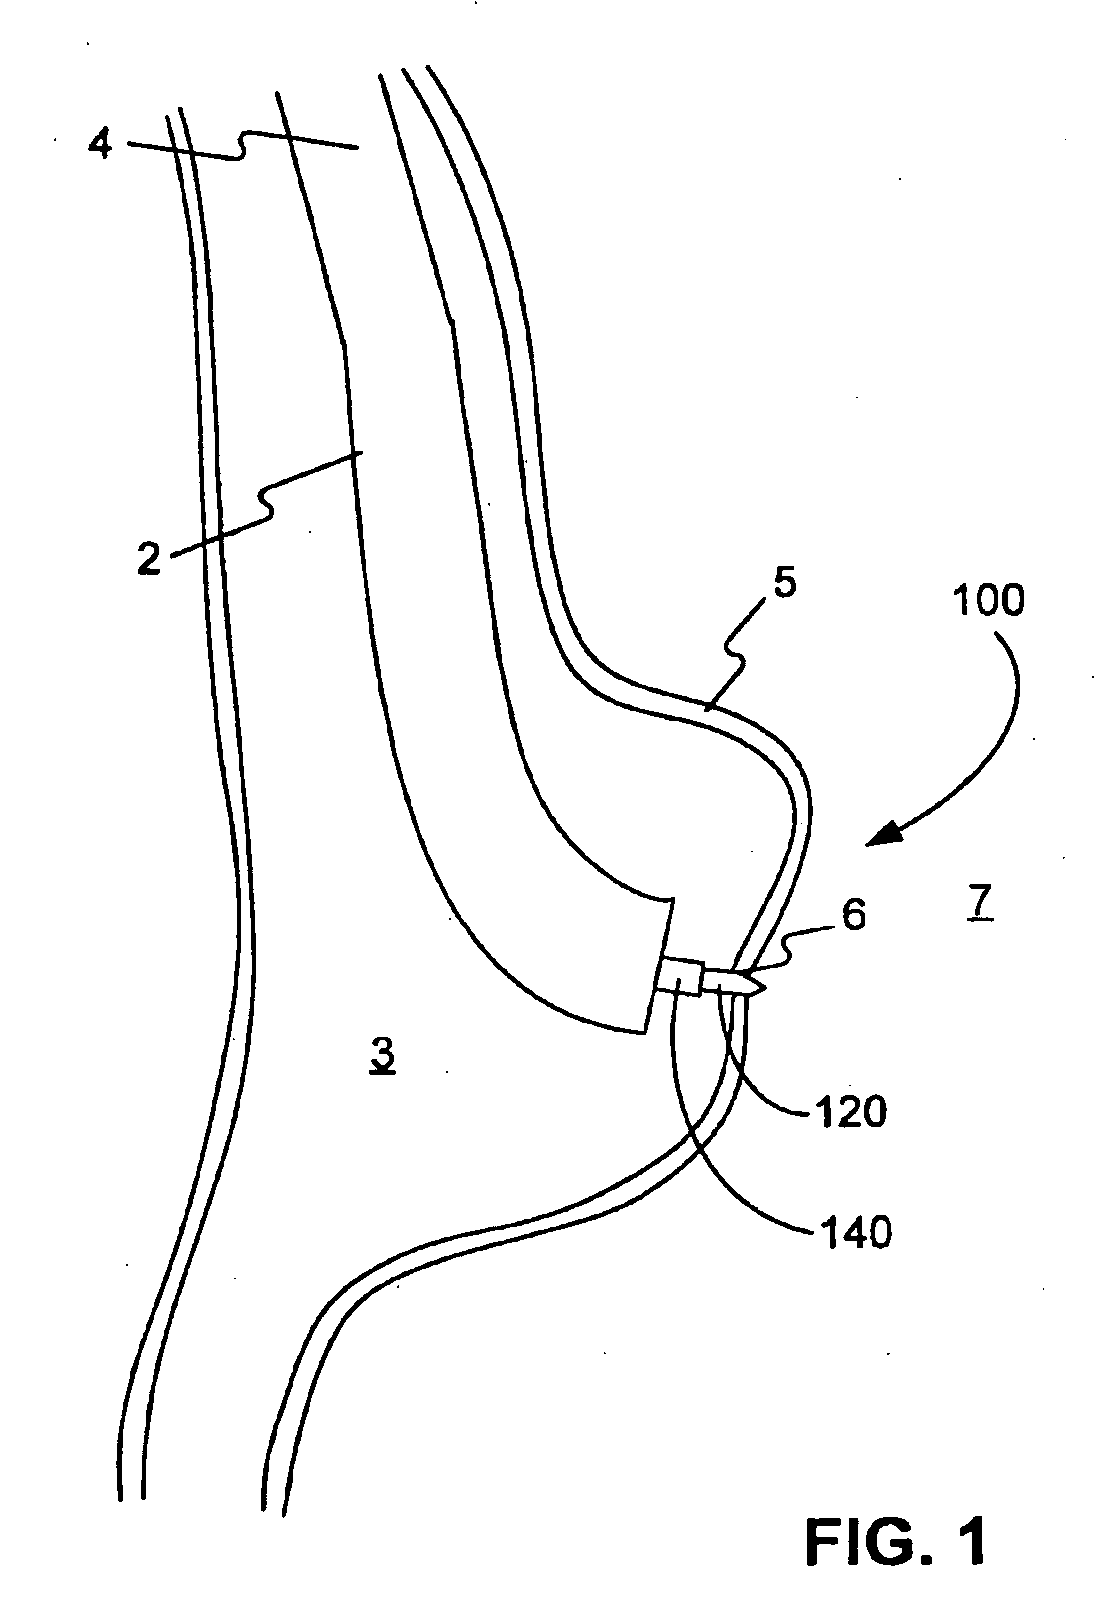 Tissue aperture securing and sealing apparatuses and related methods of use